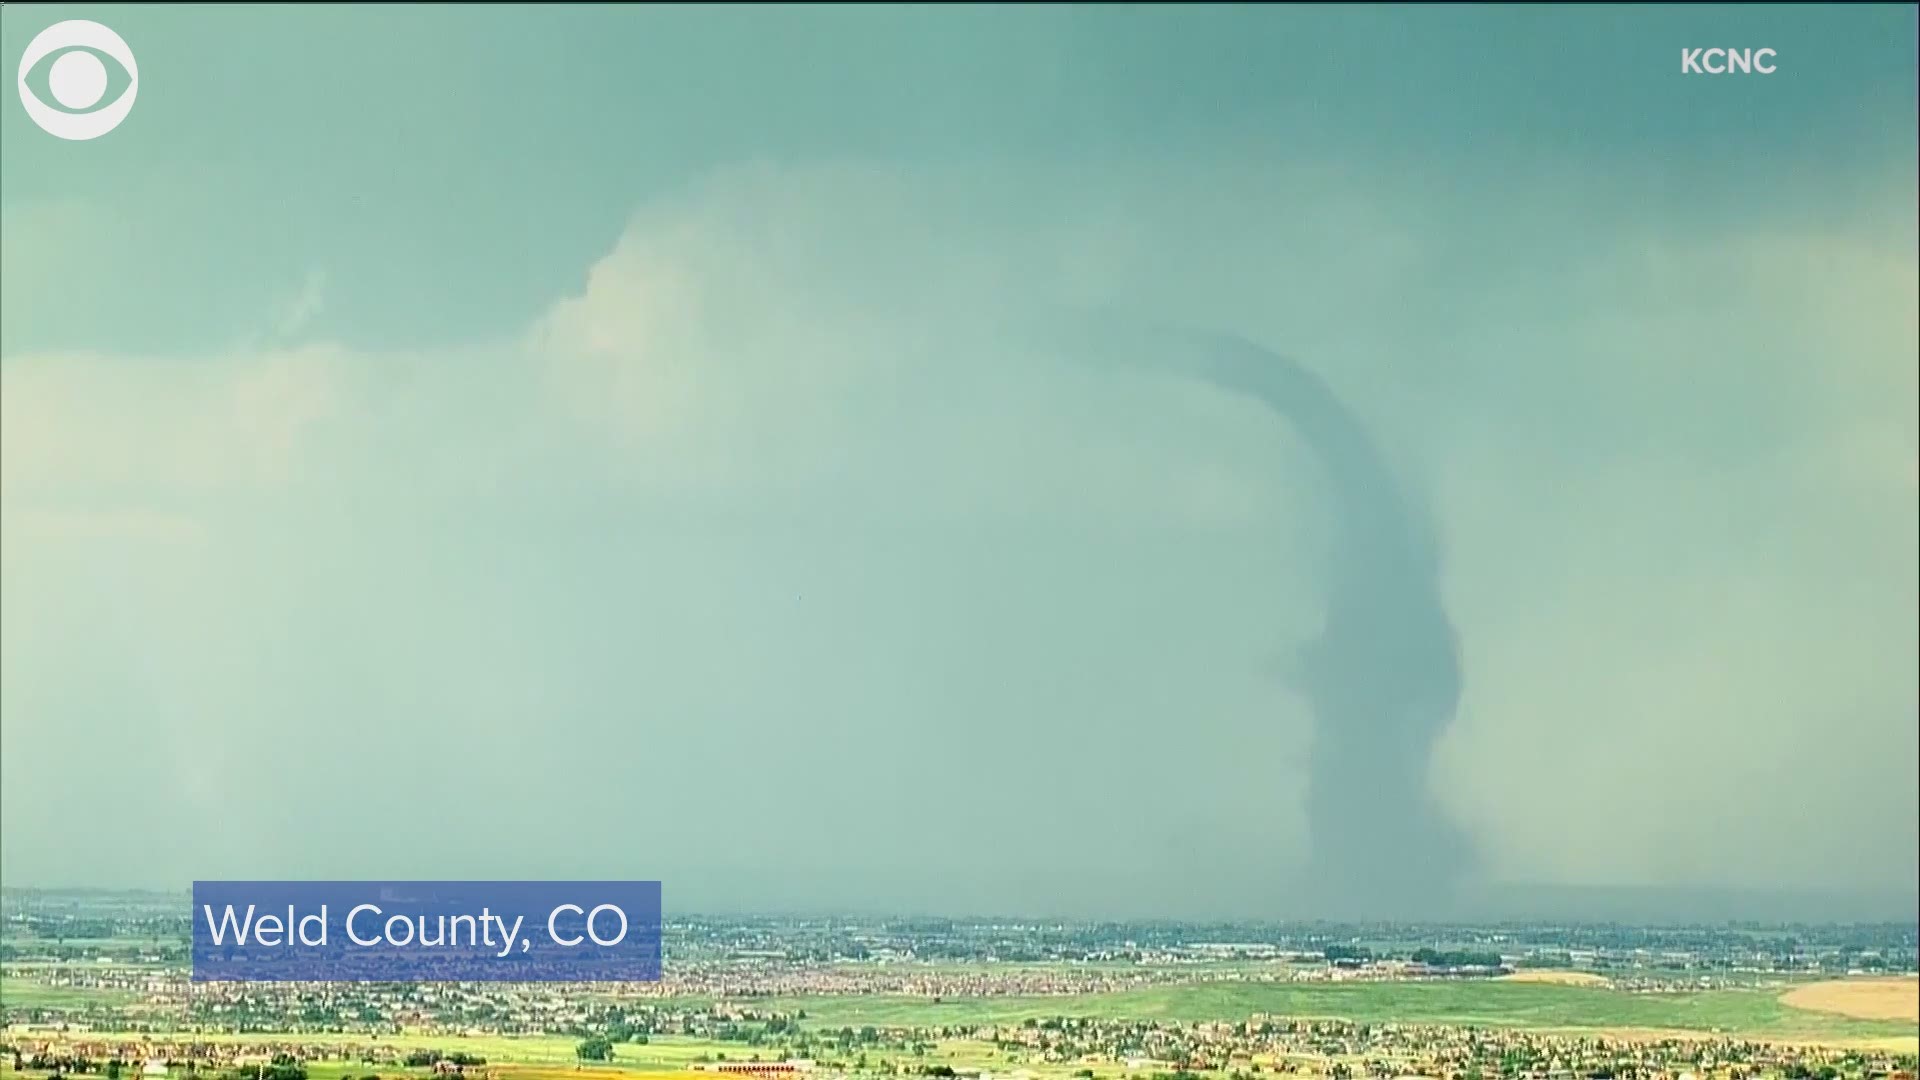 A tornado touched down in Weld County, Colorado on Monday (6/7). The National Weather Service said that there were reports of some damage